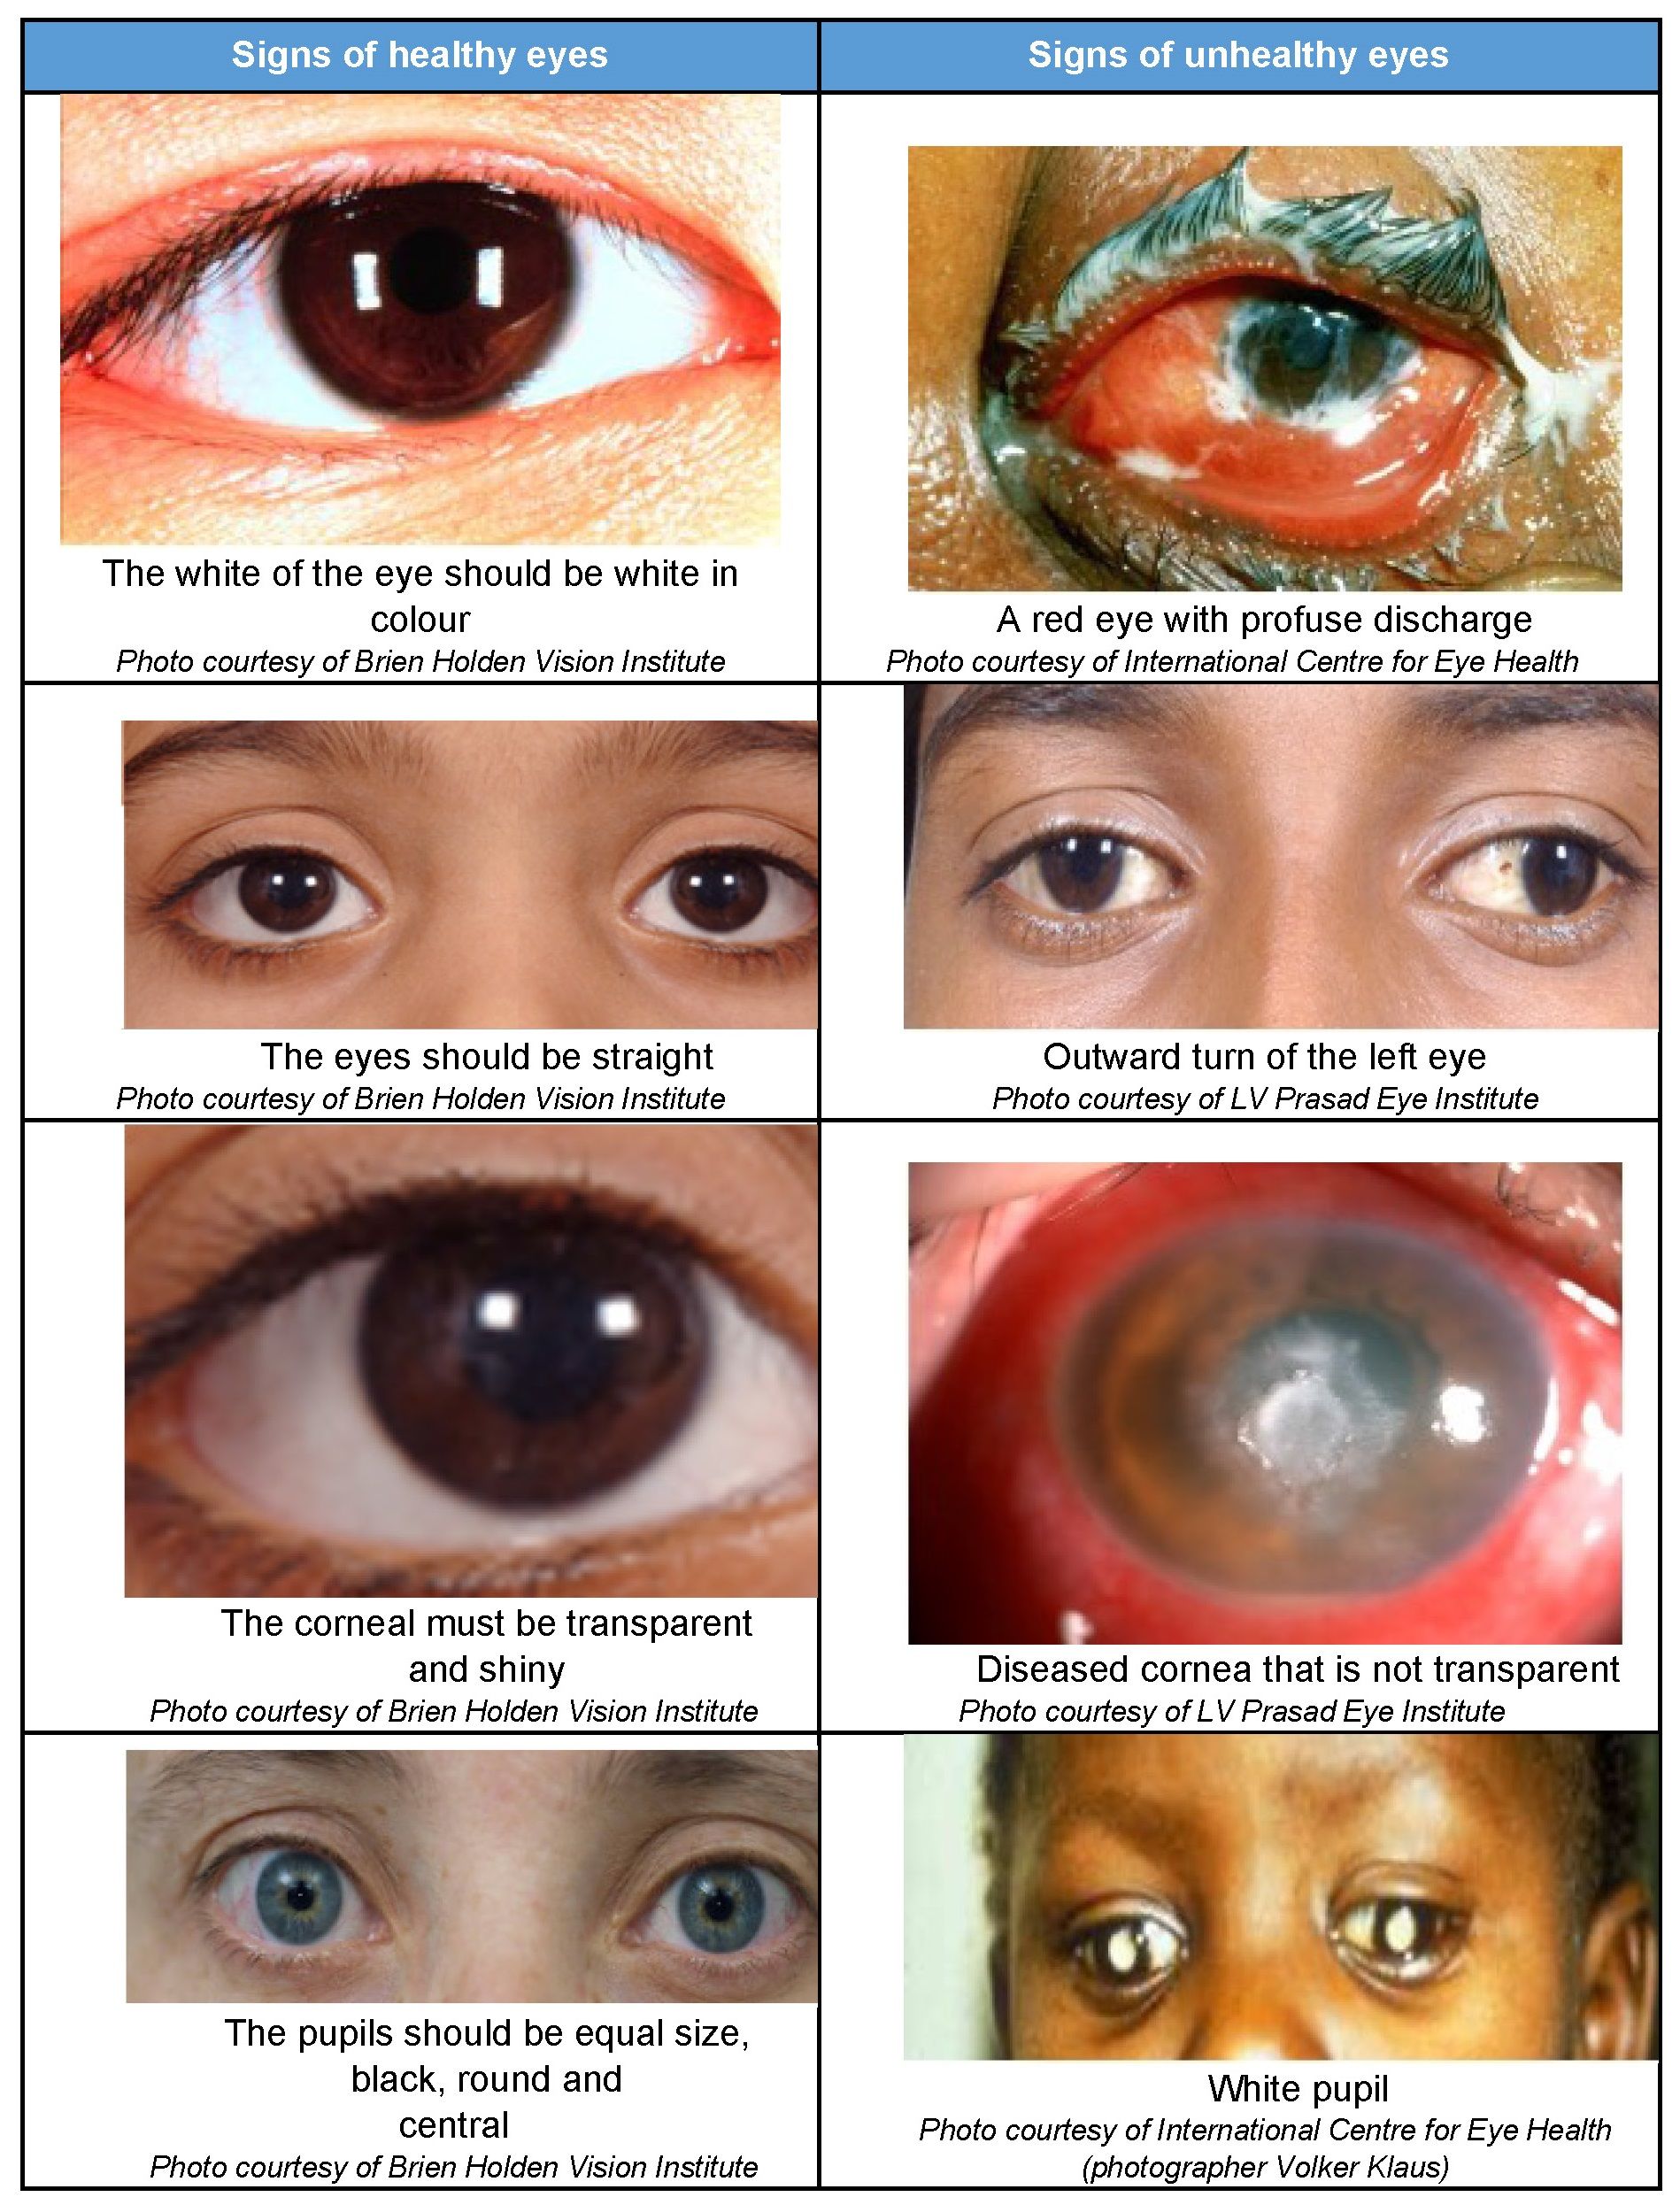 A comparison chart showing signs of healthy and unhealthy eyes.